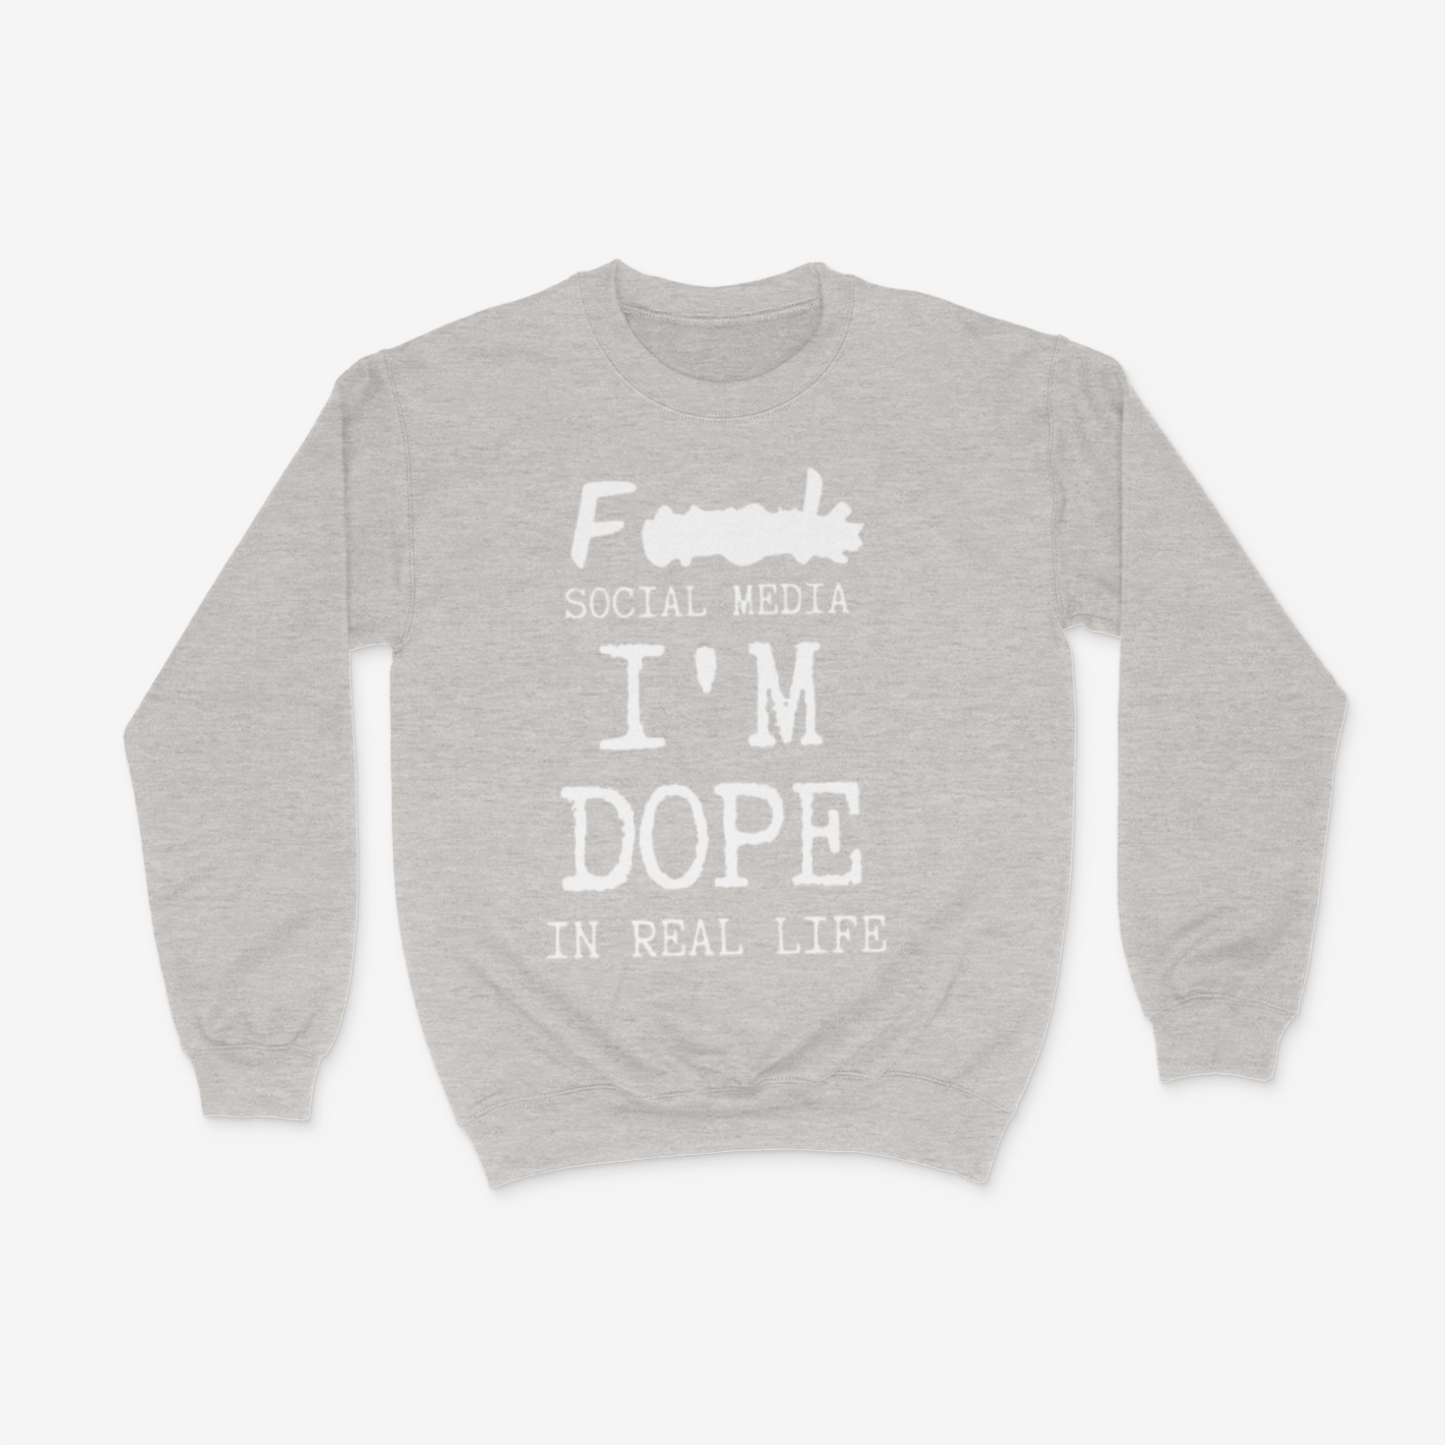 I'm Dope in Real Life Crewneck